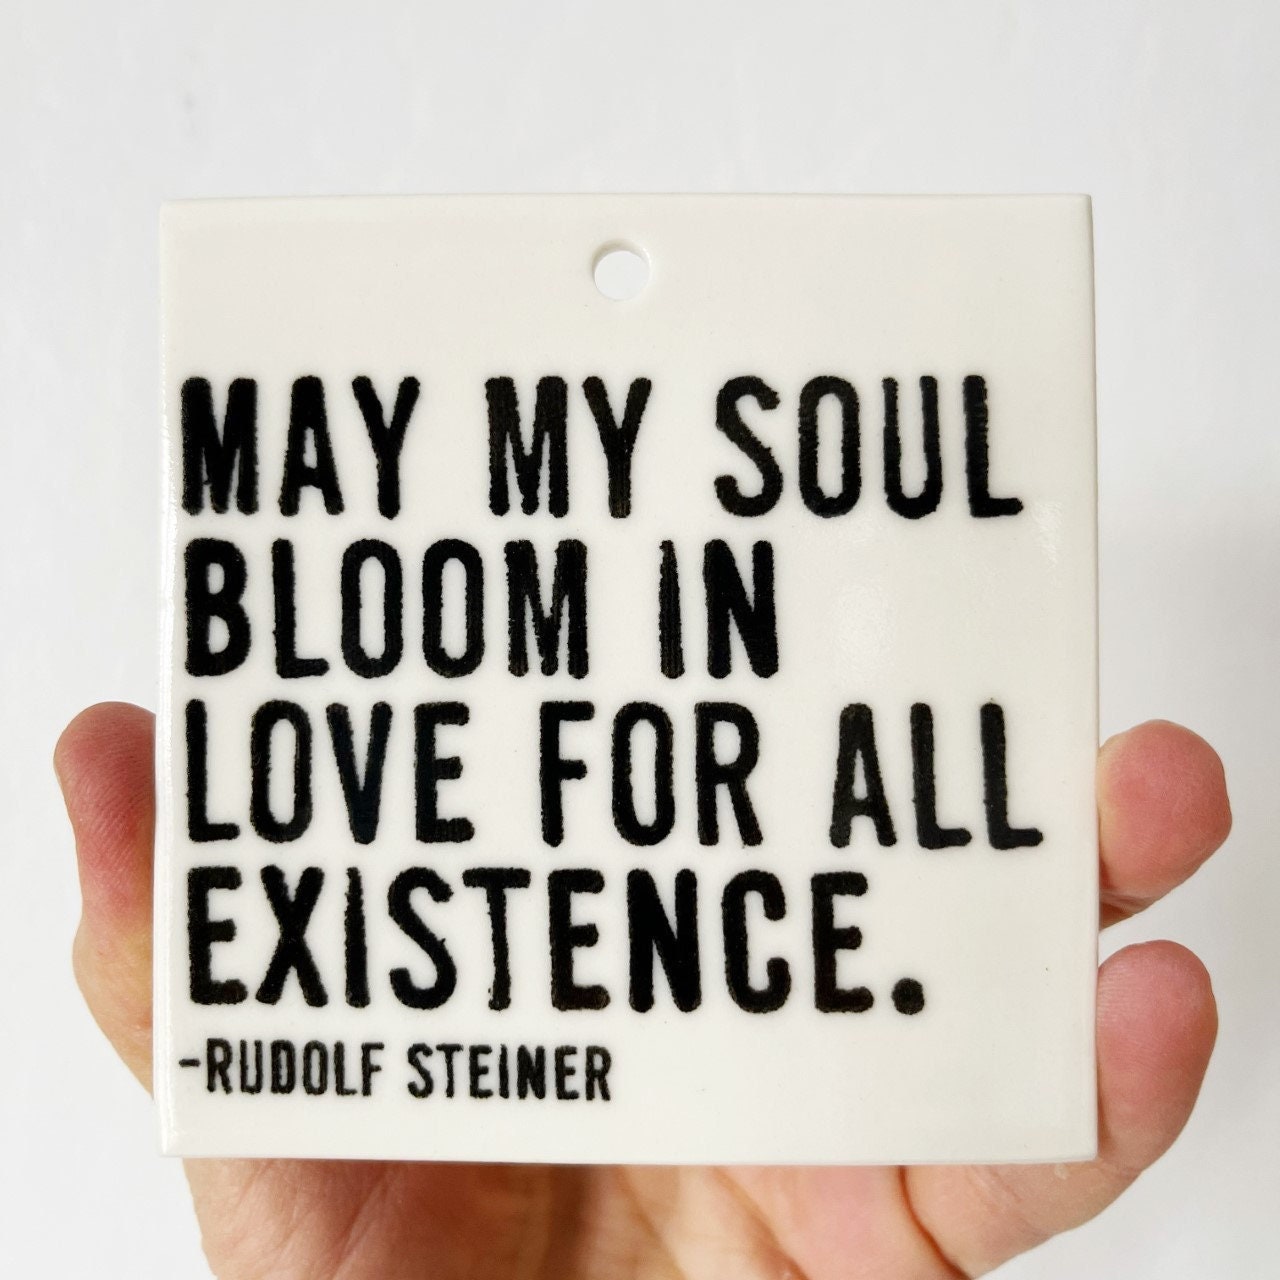 rudolf steiner | anthroposophy | waldorf education | ceramic wall tag | ceramic wall art | love for all | we are one | may my soul bloom